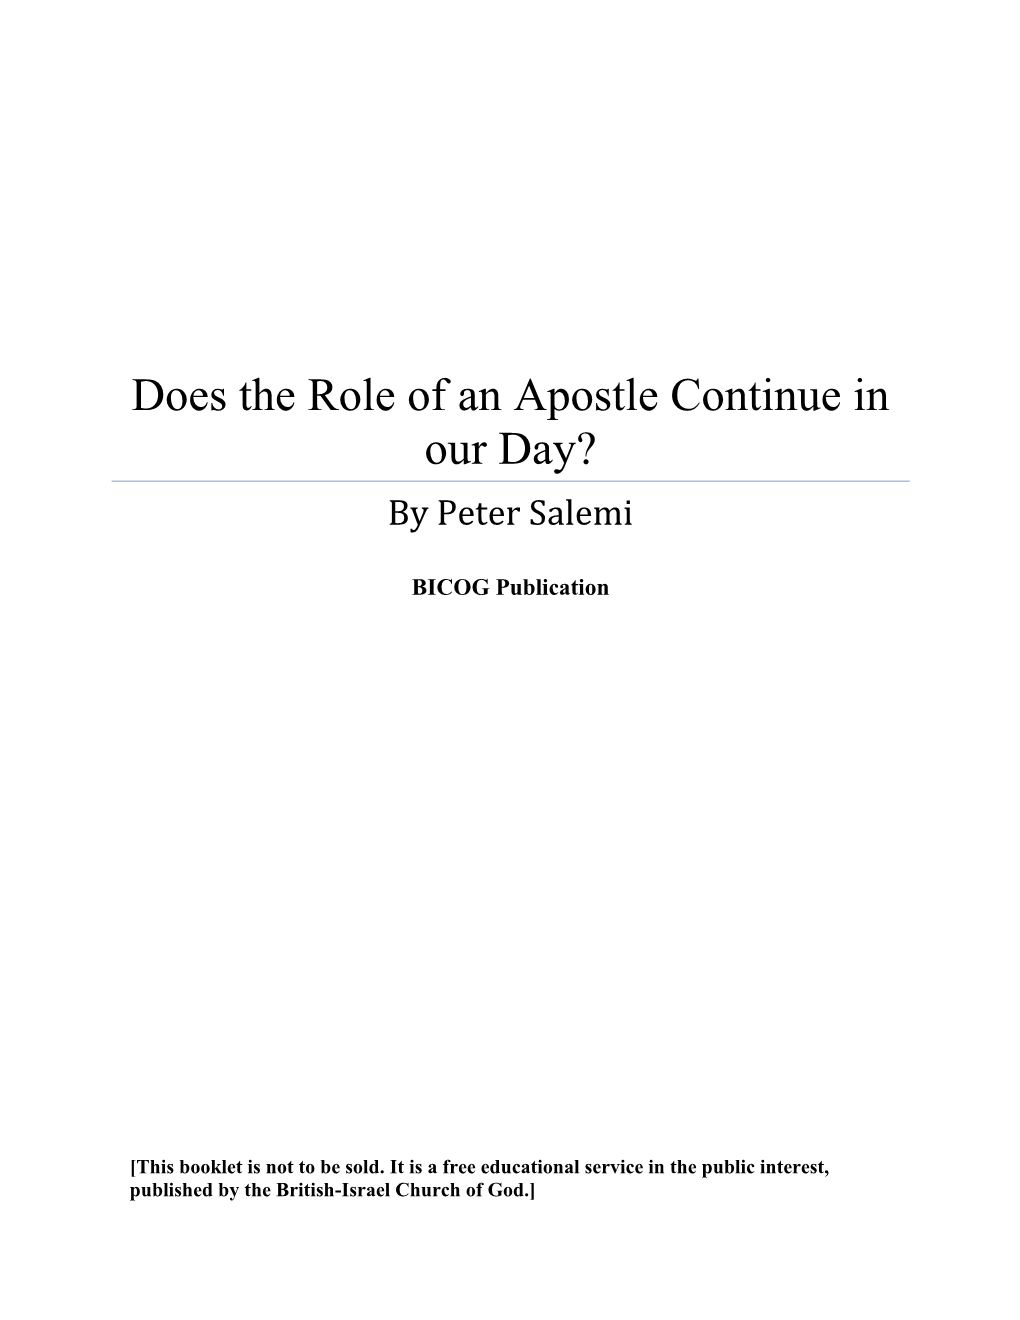 Does the Role of an Apostle Continue in Our Day? by Peter Salemi